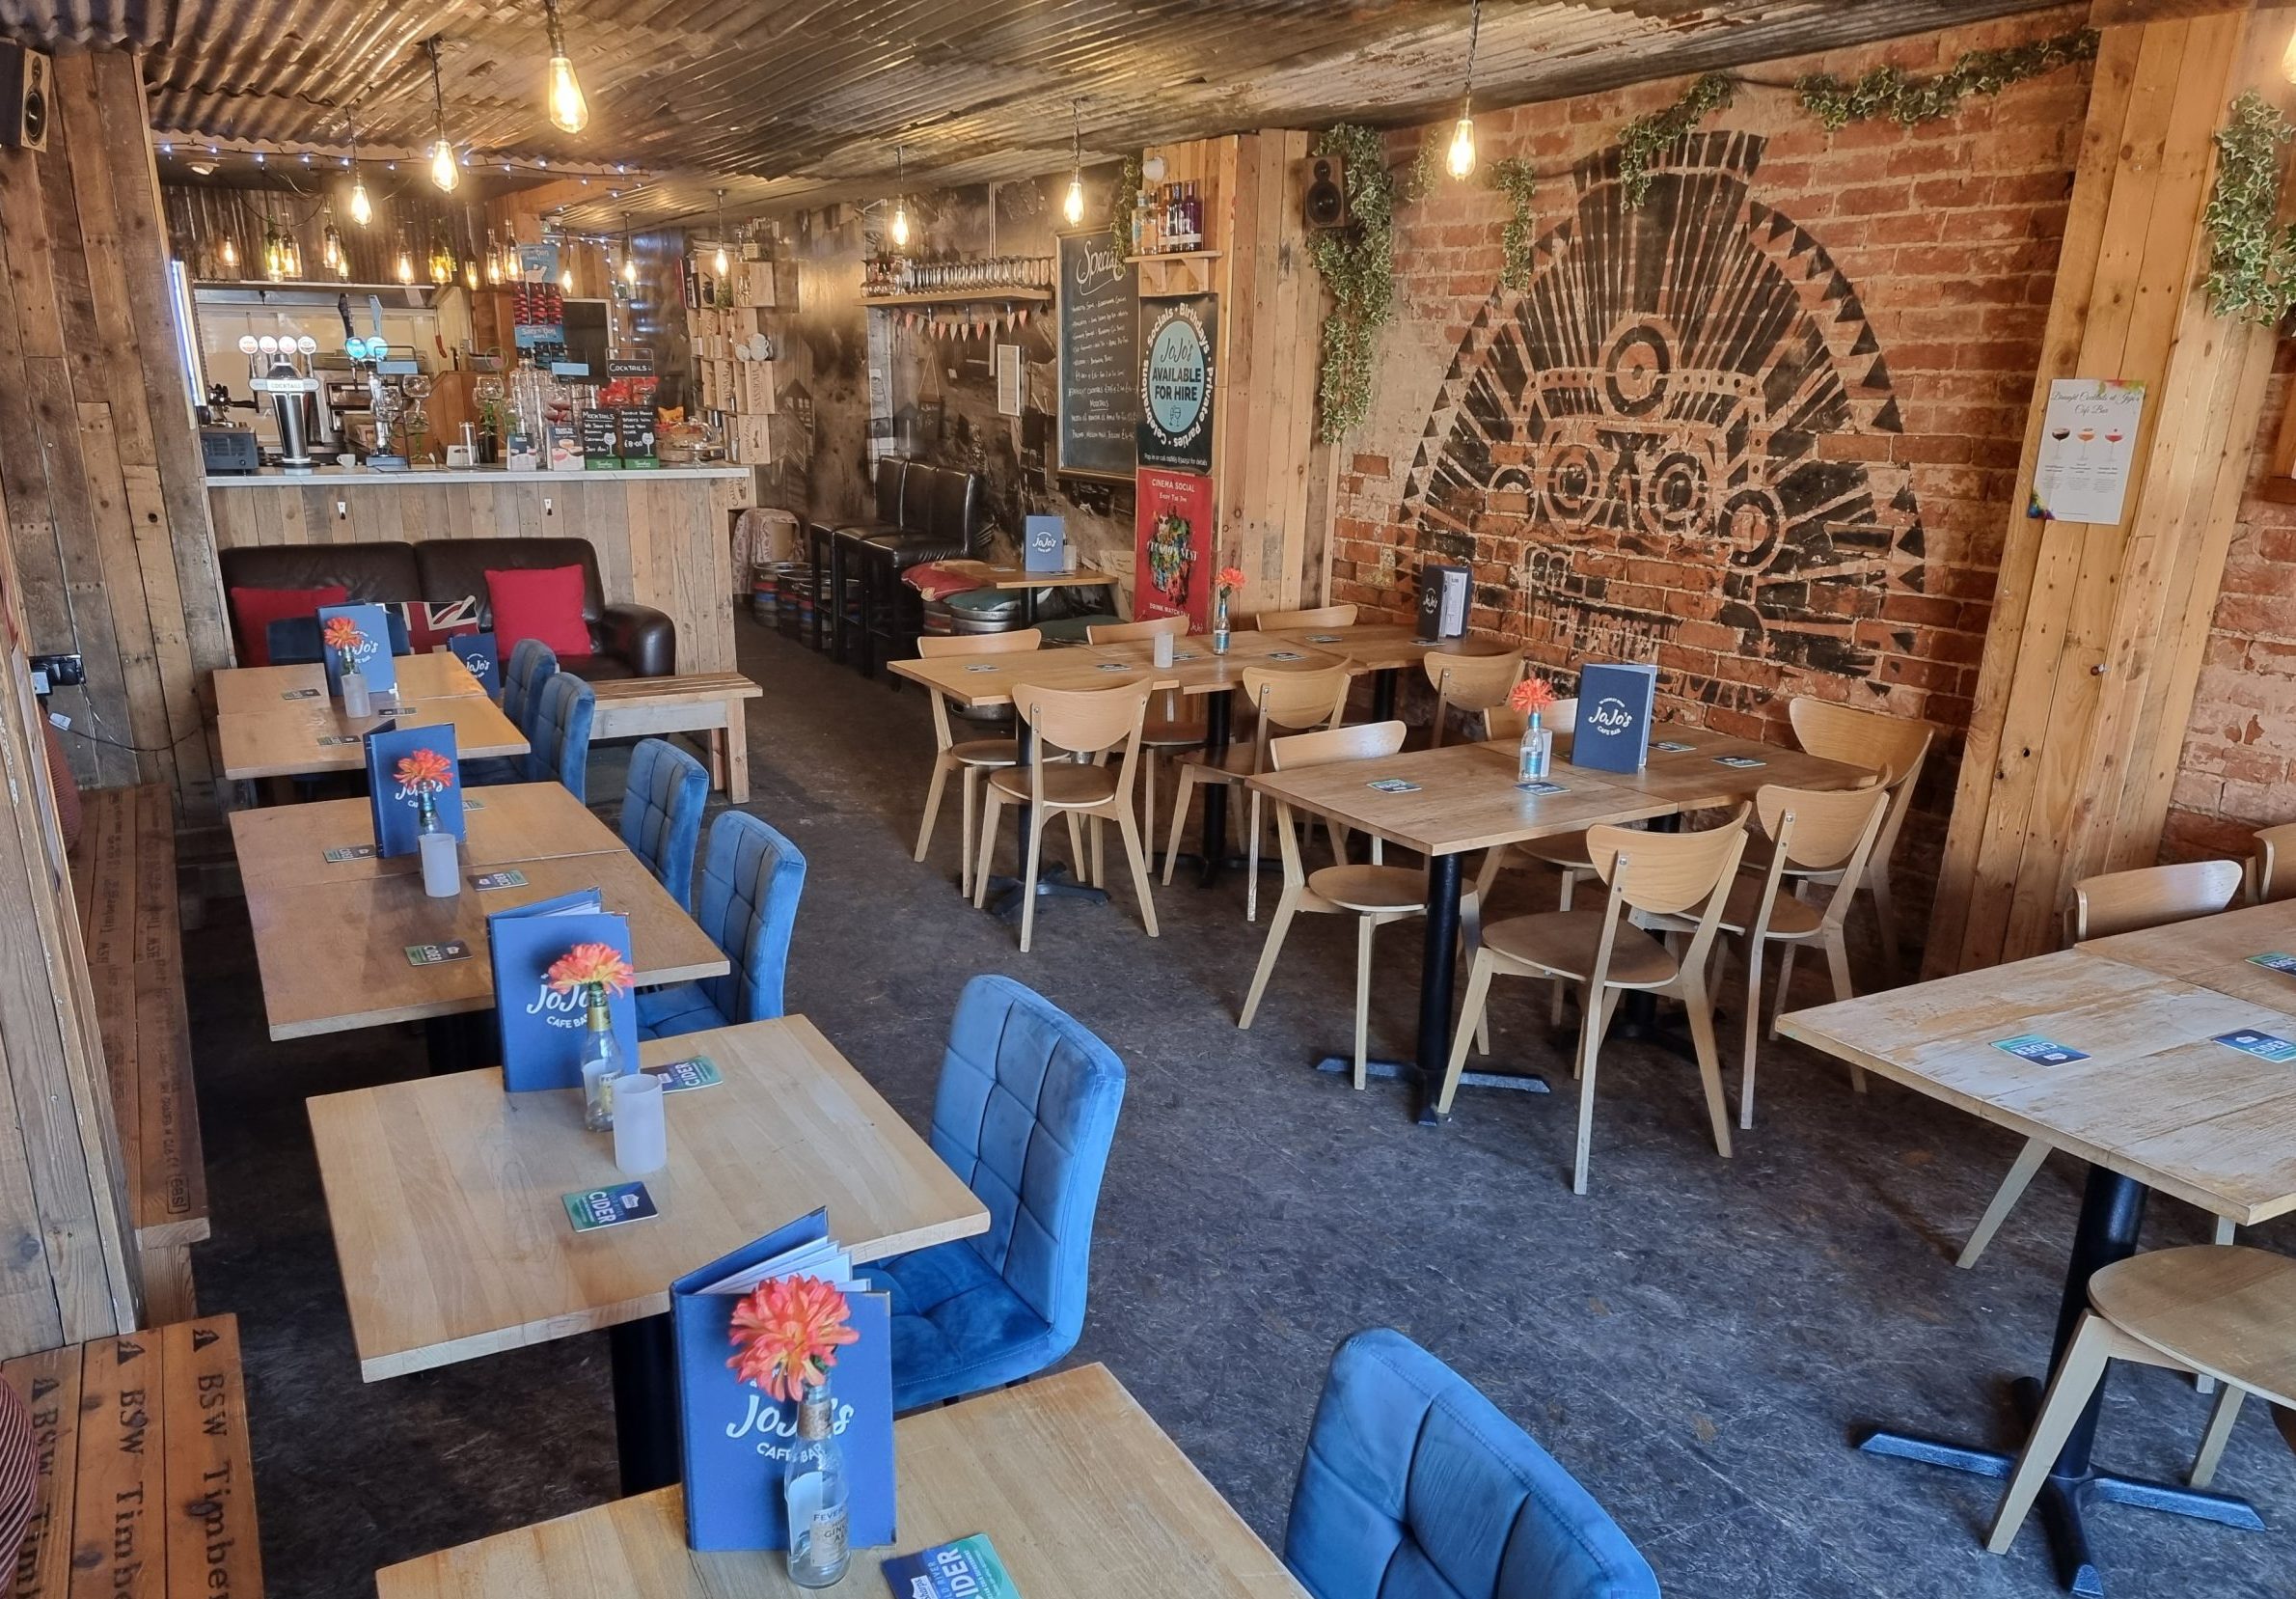 Where to Find JoJo’s Cafe Bar on Cowley Road